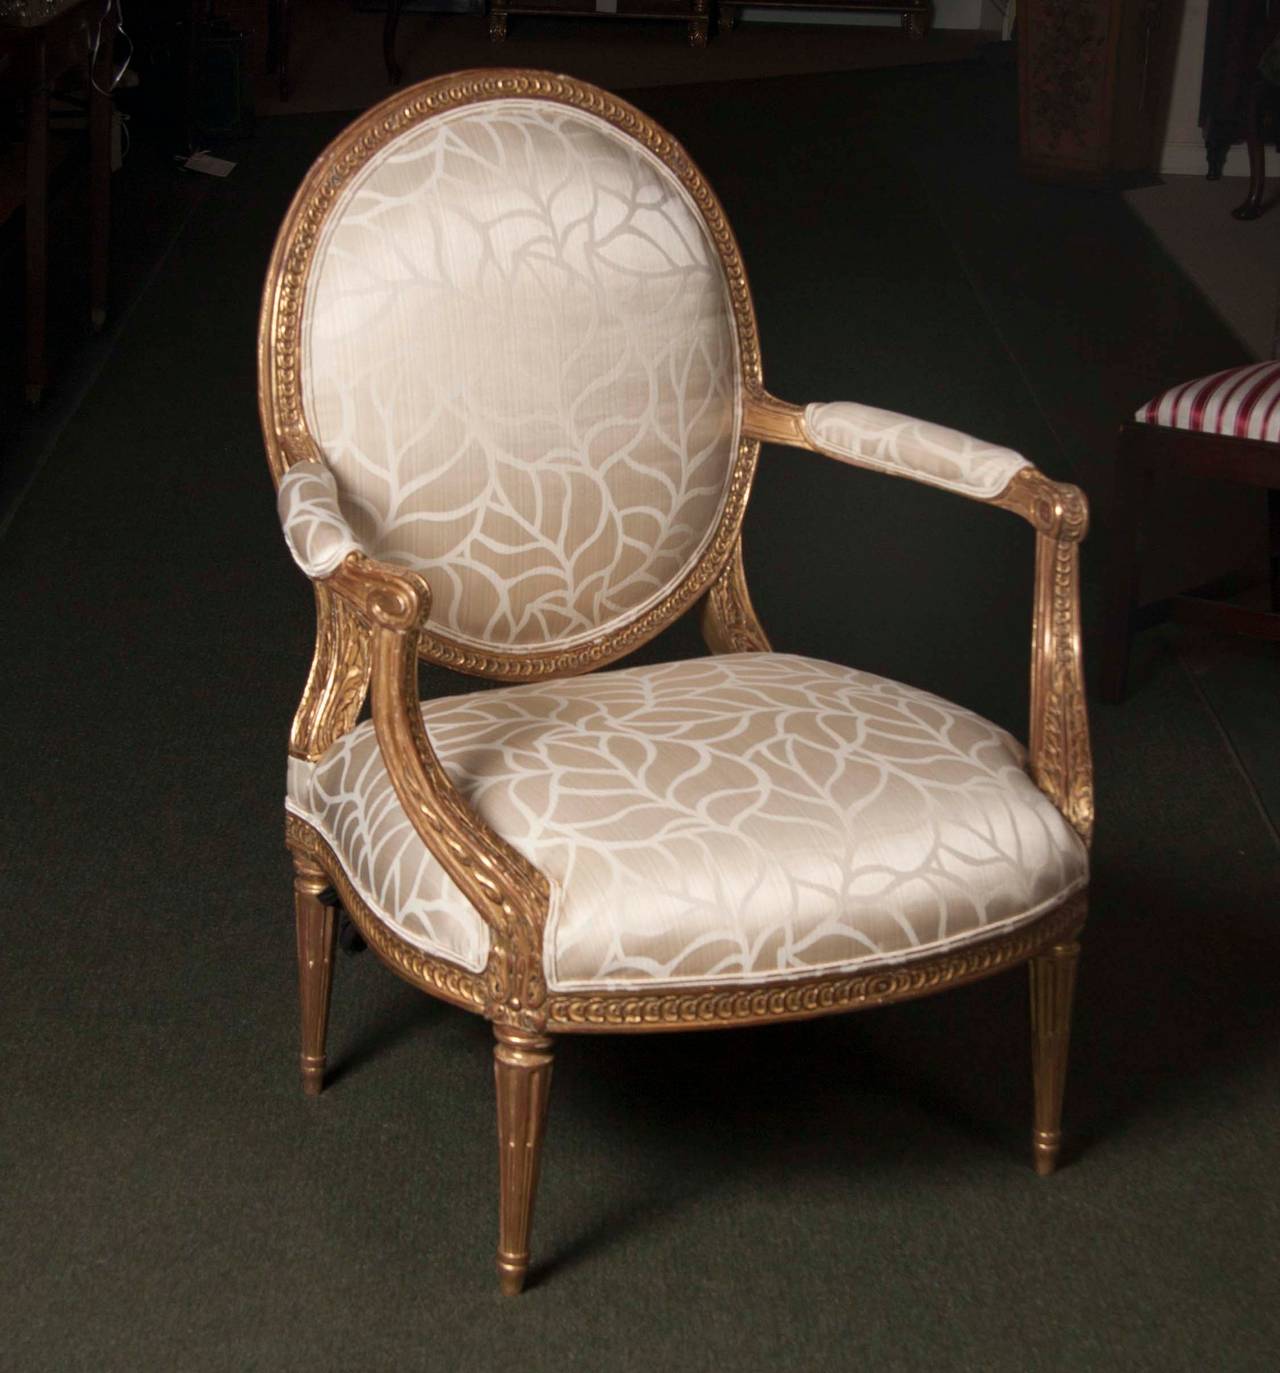 A pair of Louis XVI style fauteuils with fabulous water gilding and exceptional upholstery.